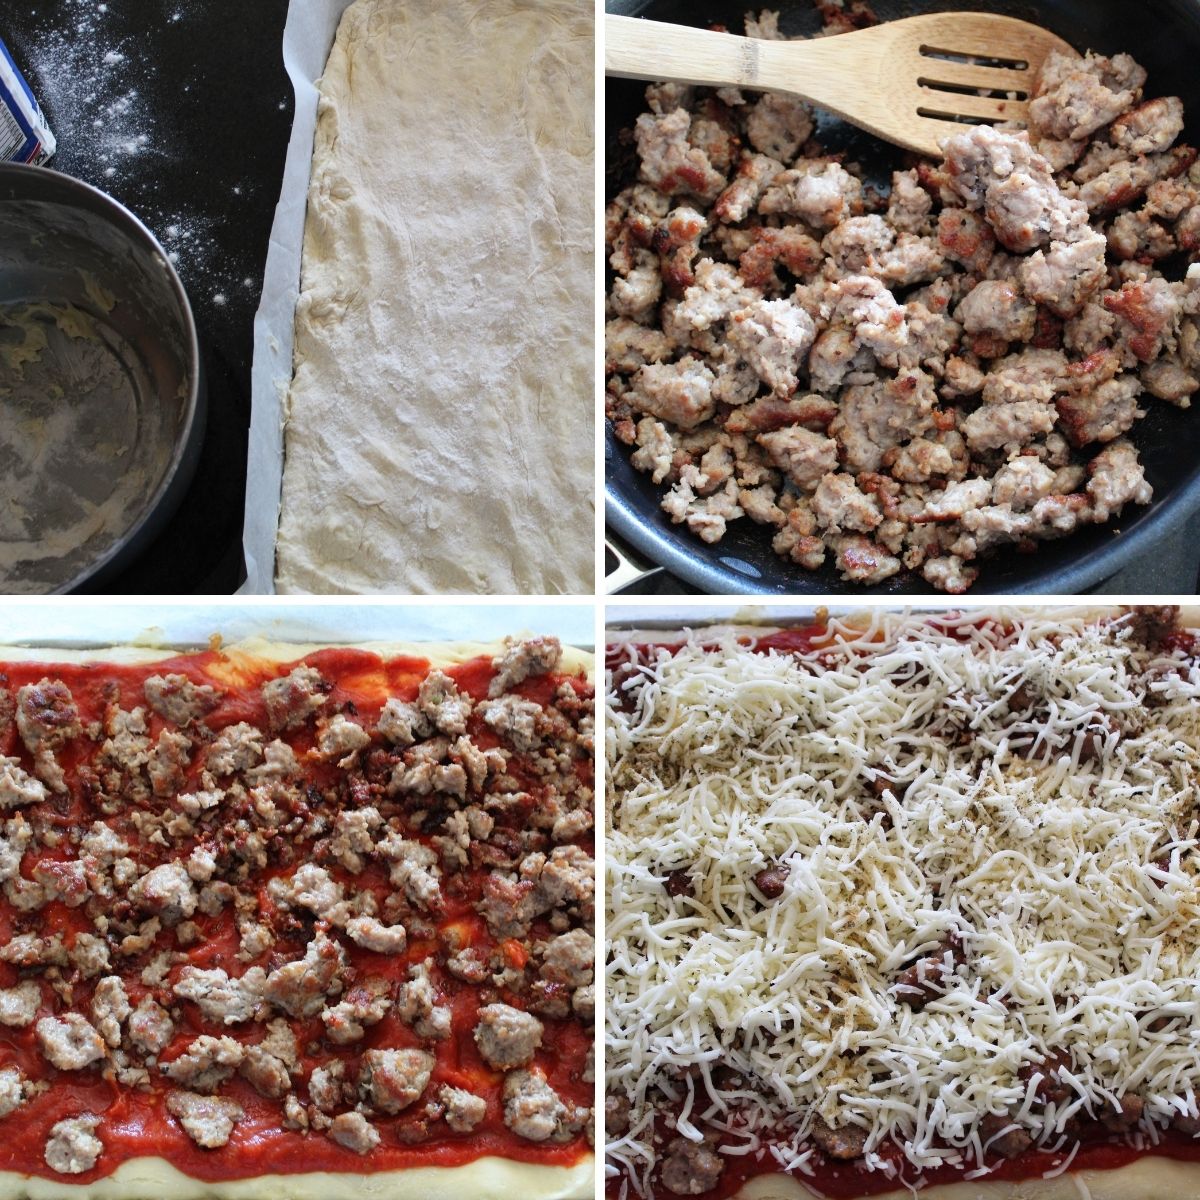 Thick Crust Sausage Pizza | Bottom Left of the Mitten